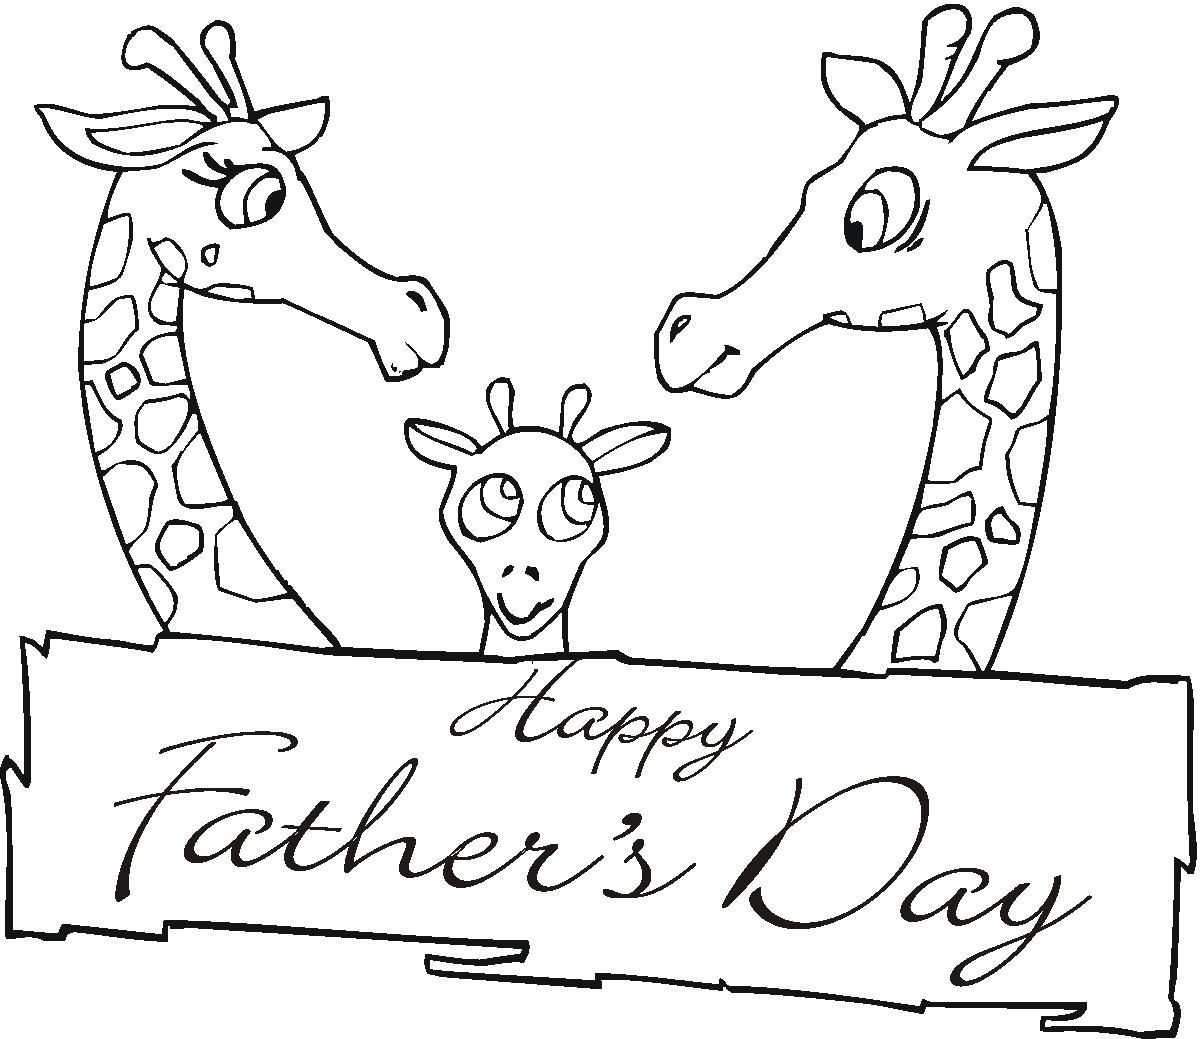 Download Fathers Day Coloring Pages - Best Coloring Pages For Kids